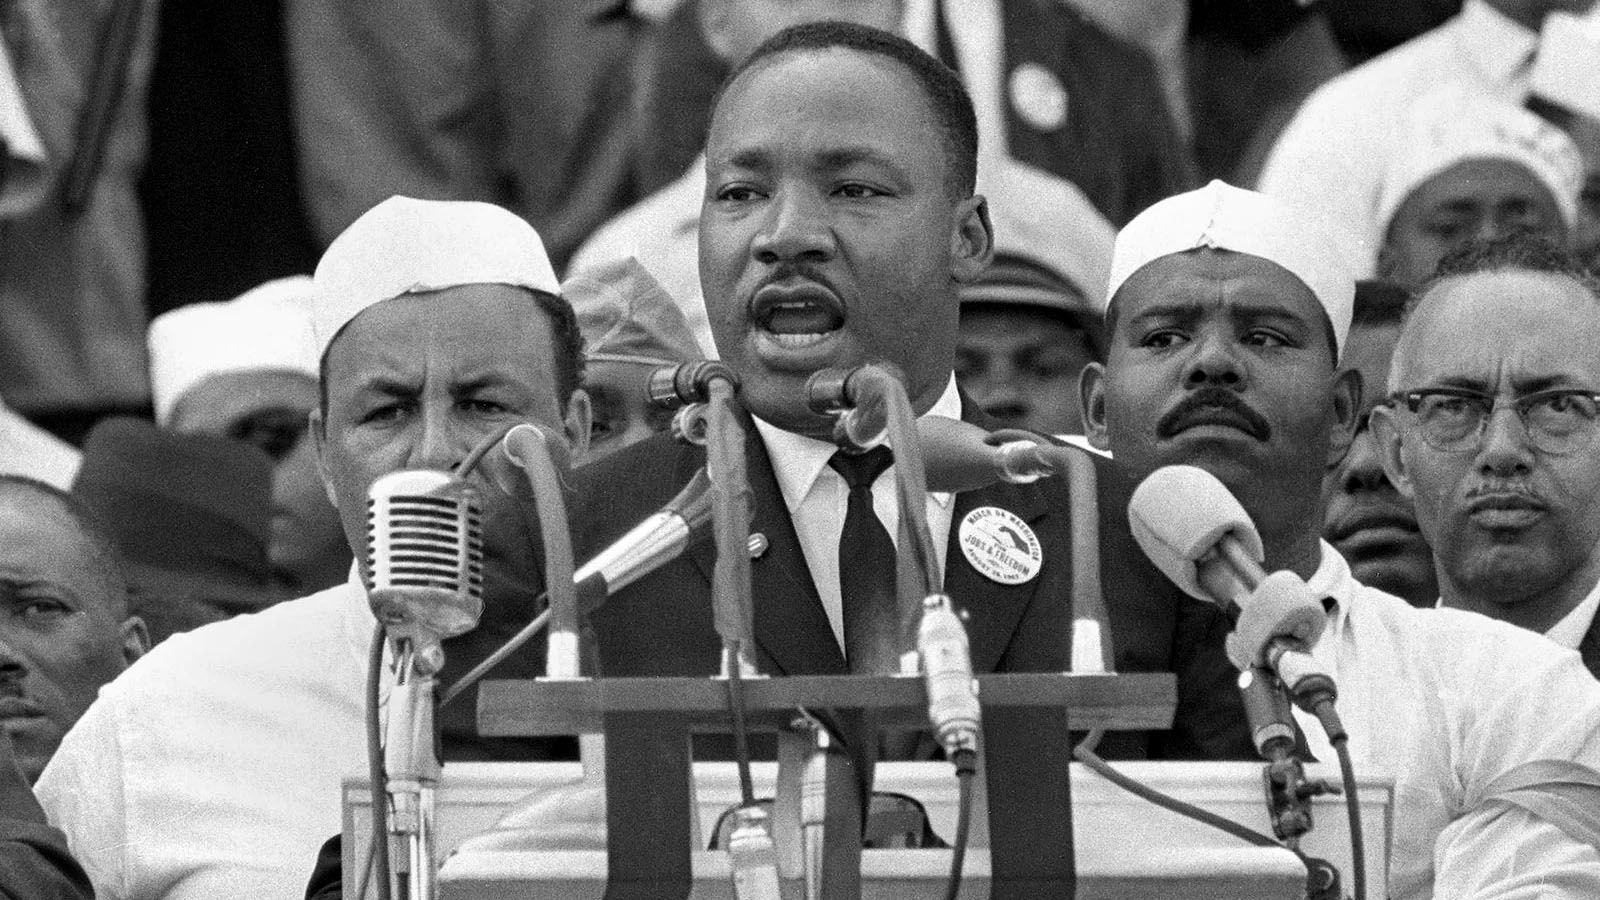 Back to the Mountaintop at Embassy Theatre on April 3 will honor King's "I Have a Dream" speech.